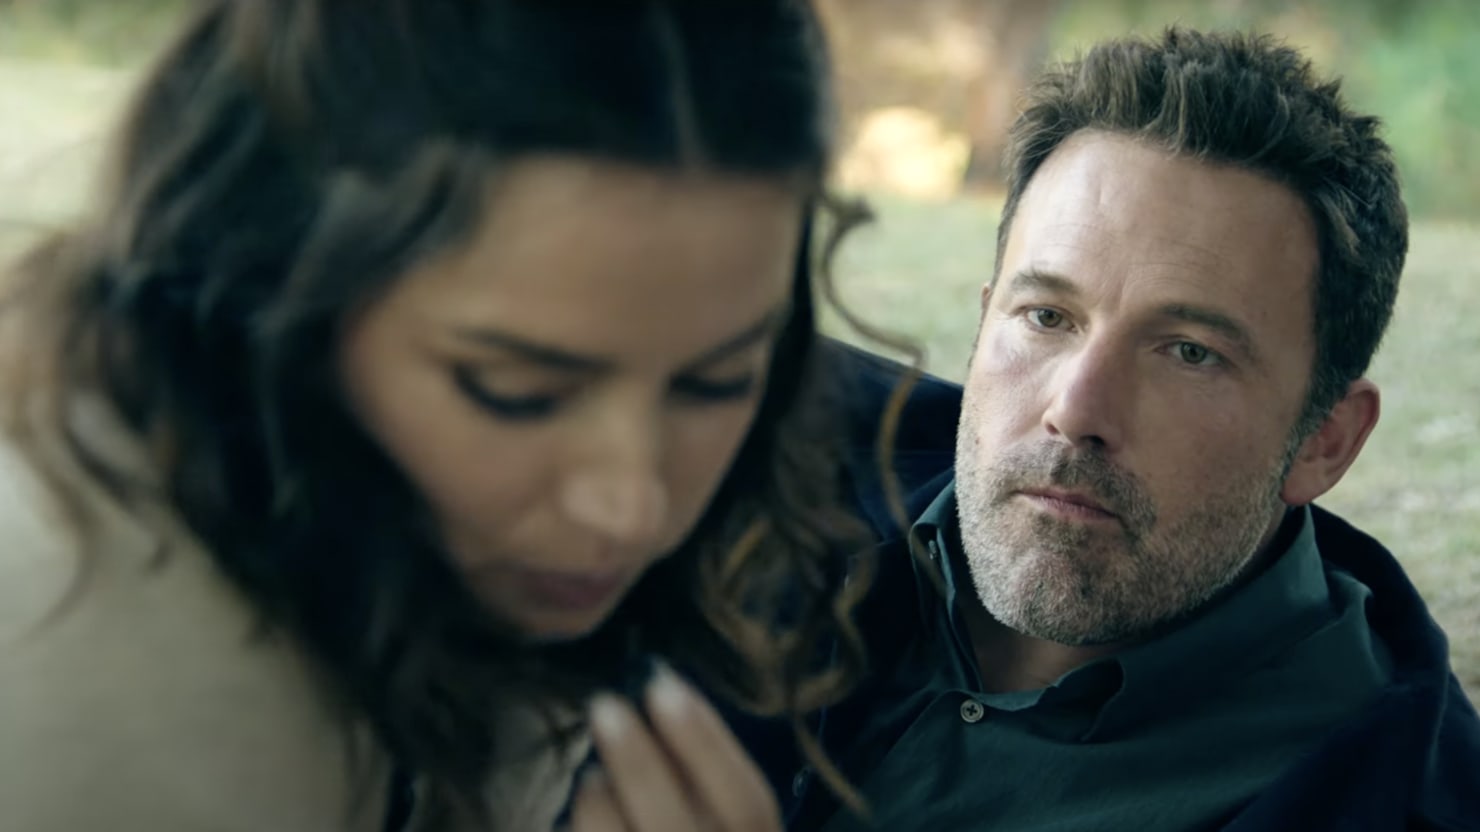 Exes Ben Affleck And Ana De Armas Get Hot And Heavy In Trailer For